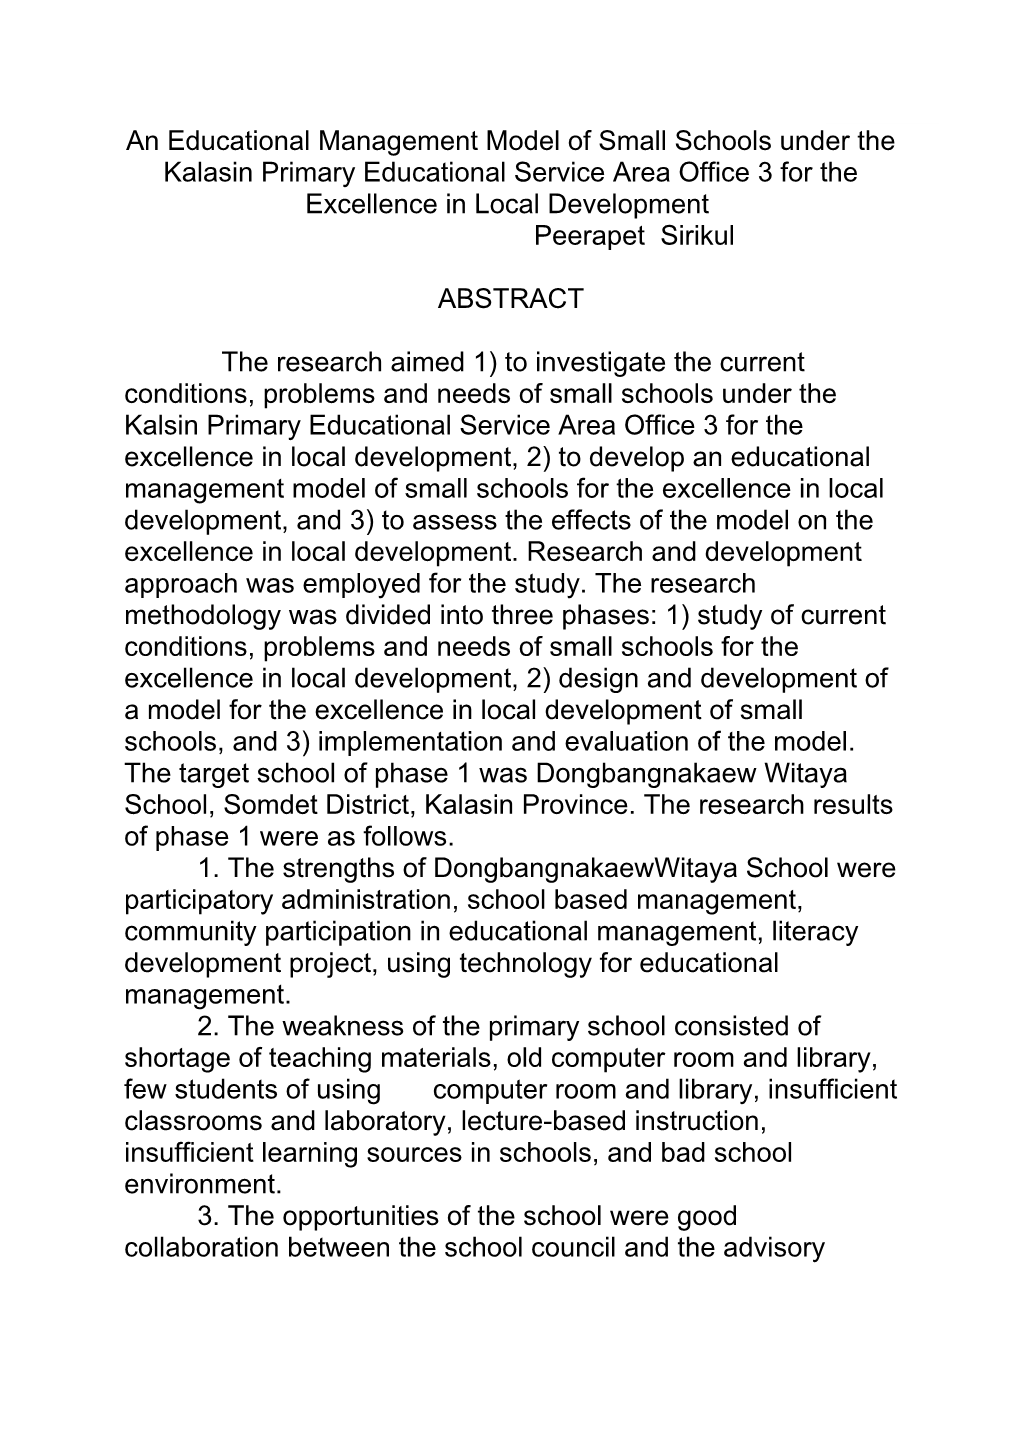 An Educational Management Model of Small Schools Under the Kalasin Primary Educational